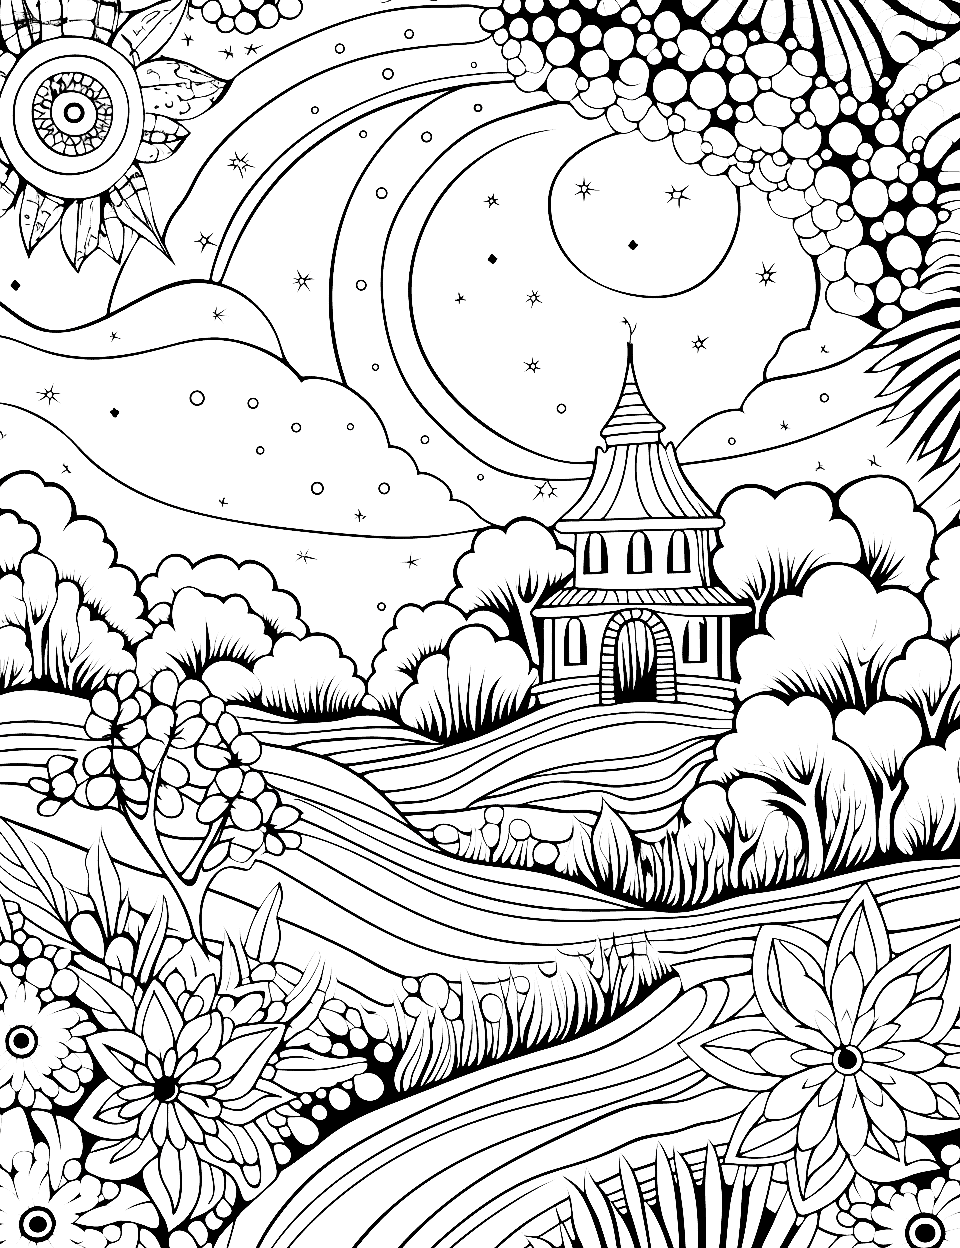 Mystical Garden Under the Moonlight Adult Coloring Page - A picturesque garden illuminated by a full moon.